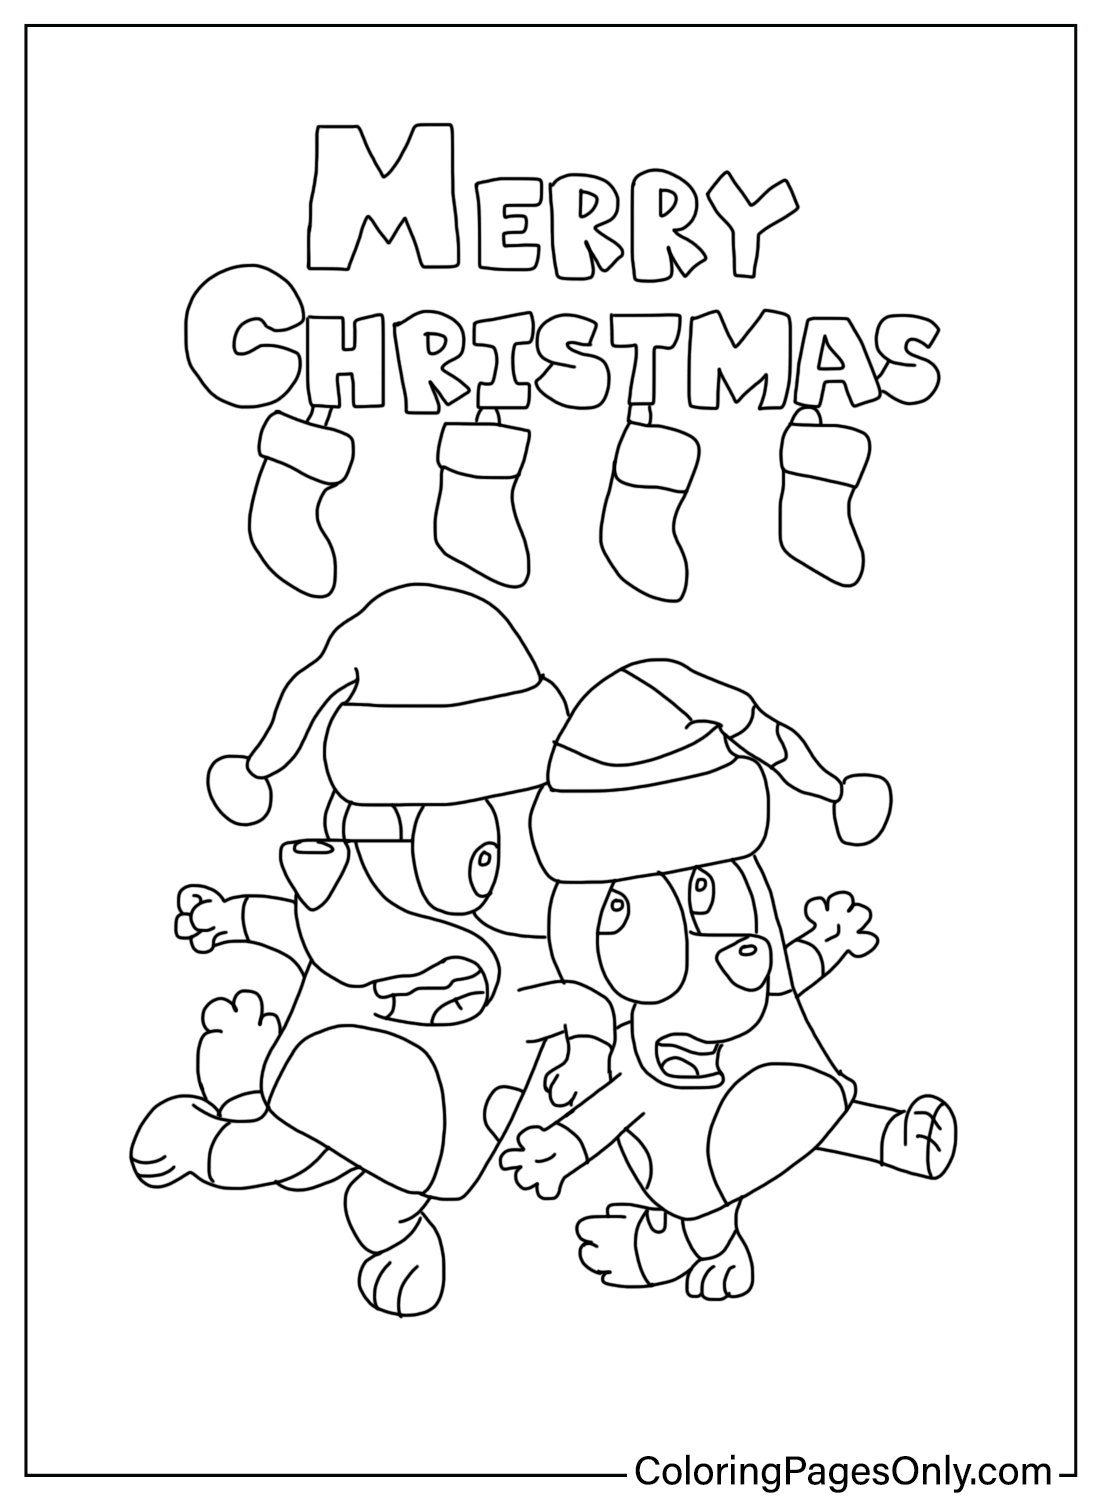 Merry Christmas Bluey Bingo Coloring Page - Free Printable Coloring Pages